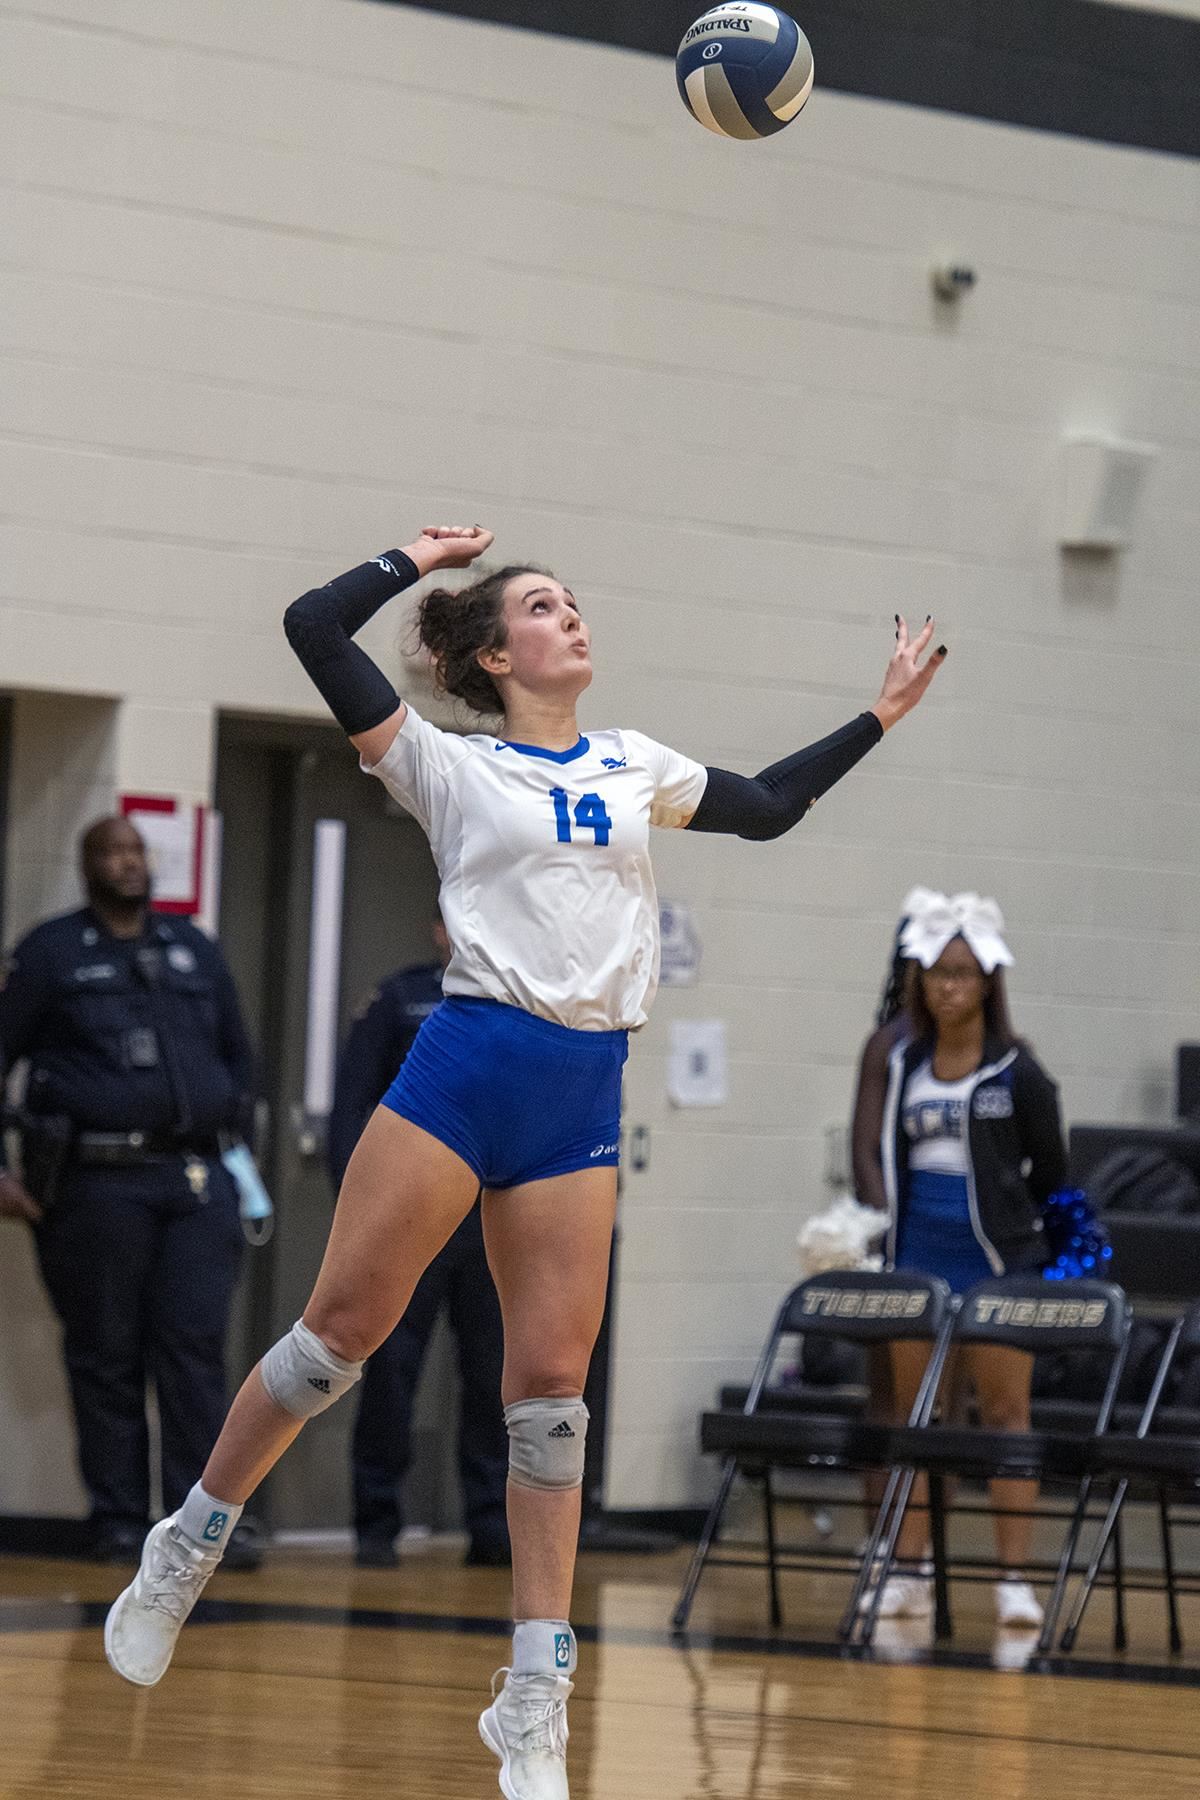 Cypress Creek senior Lindsey Kriendler was named to the American Volleyball Coaches Association All-Region Team.